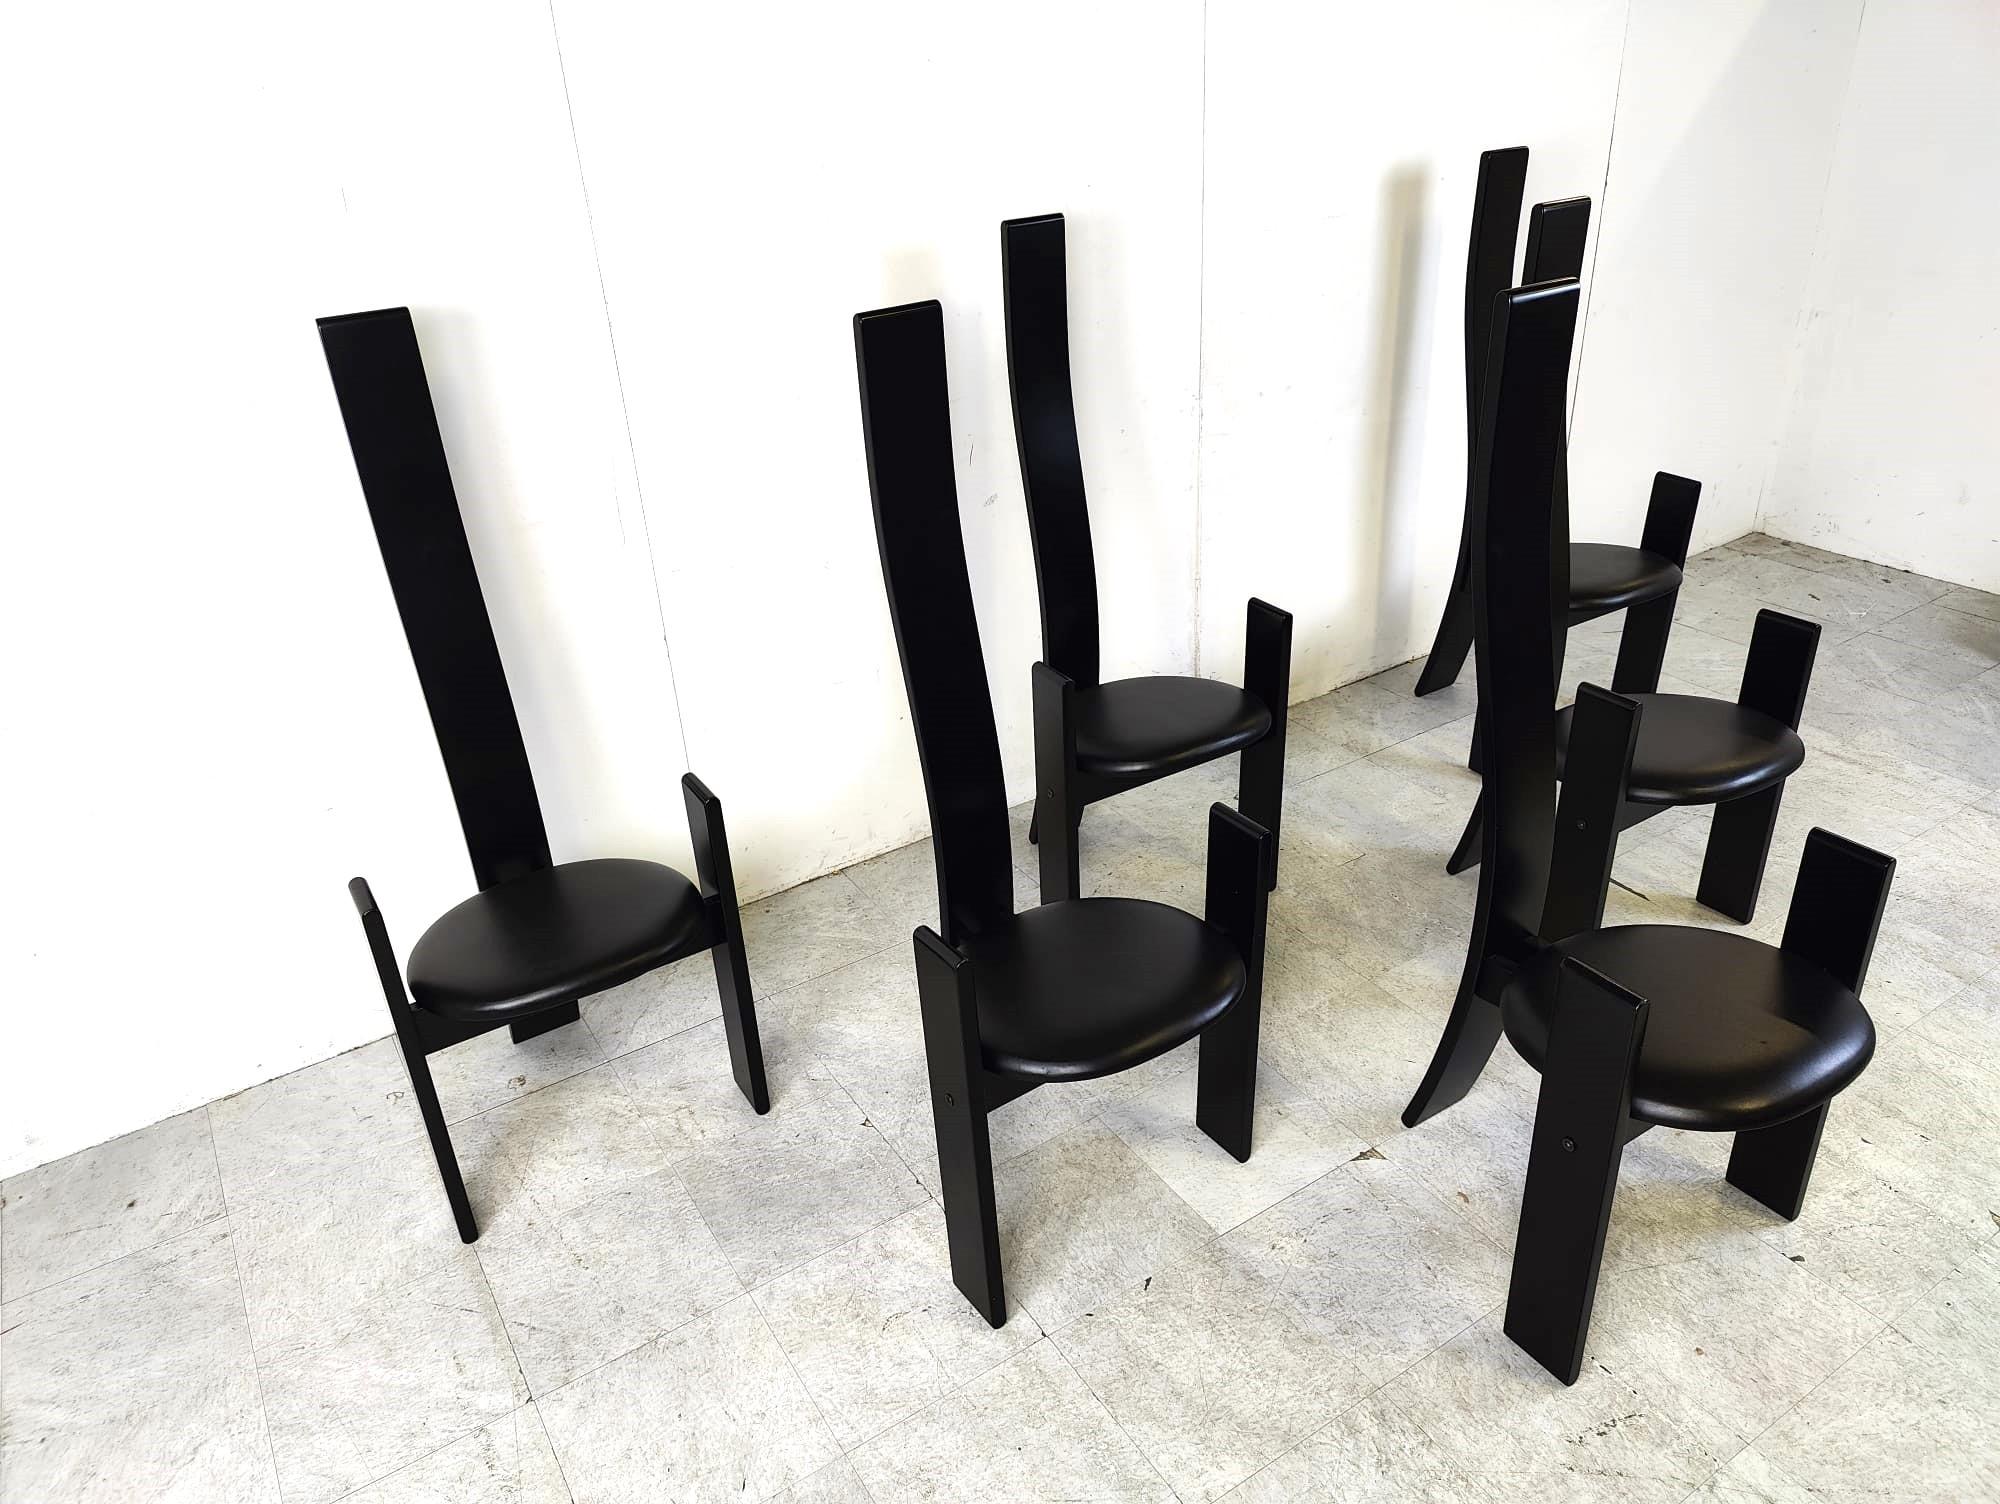 Golem chairs by Vico Magistretti, set of 6, 1970s For Sale 3